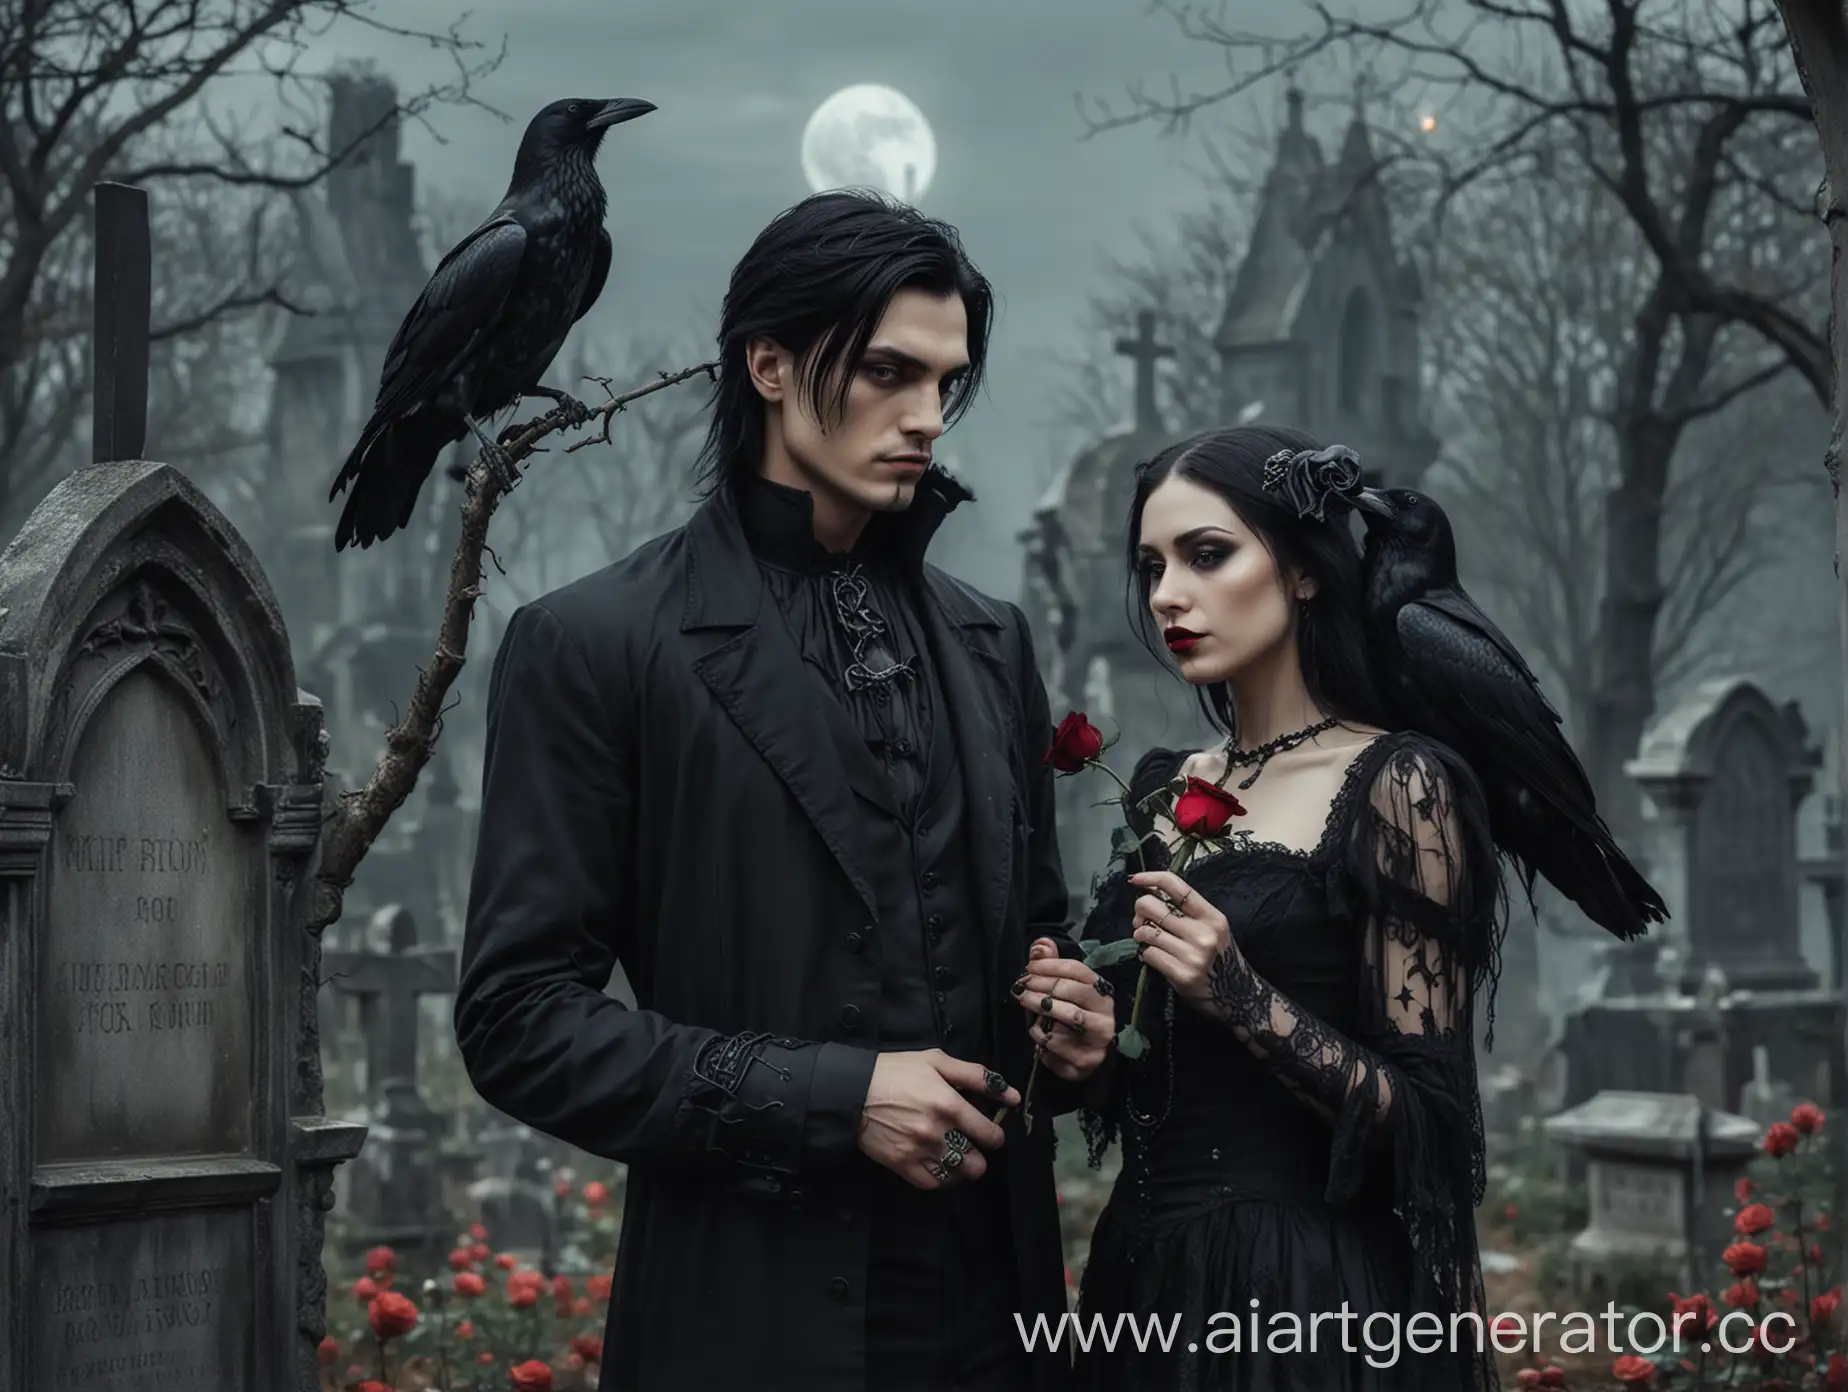 Man-with-Black-Hair-Holding-a-Rose-near-a-Gothic-Woman-in-Cemetery-with-Ravens-and-Moon